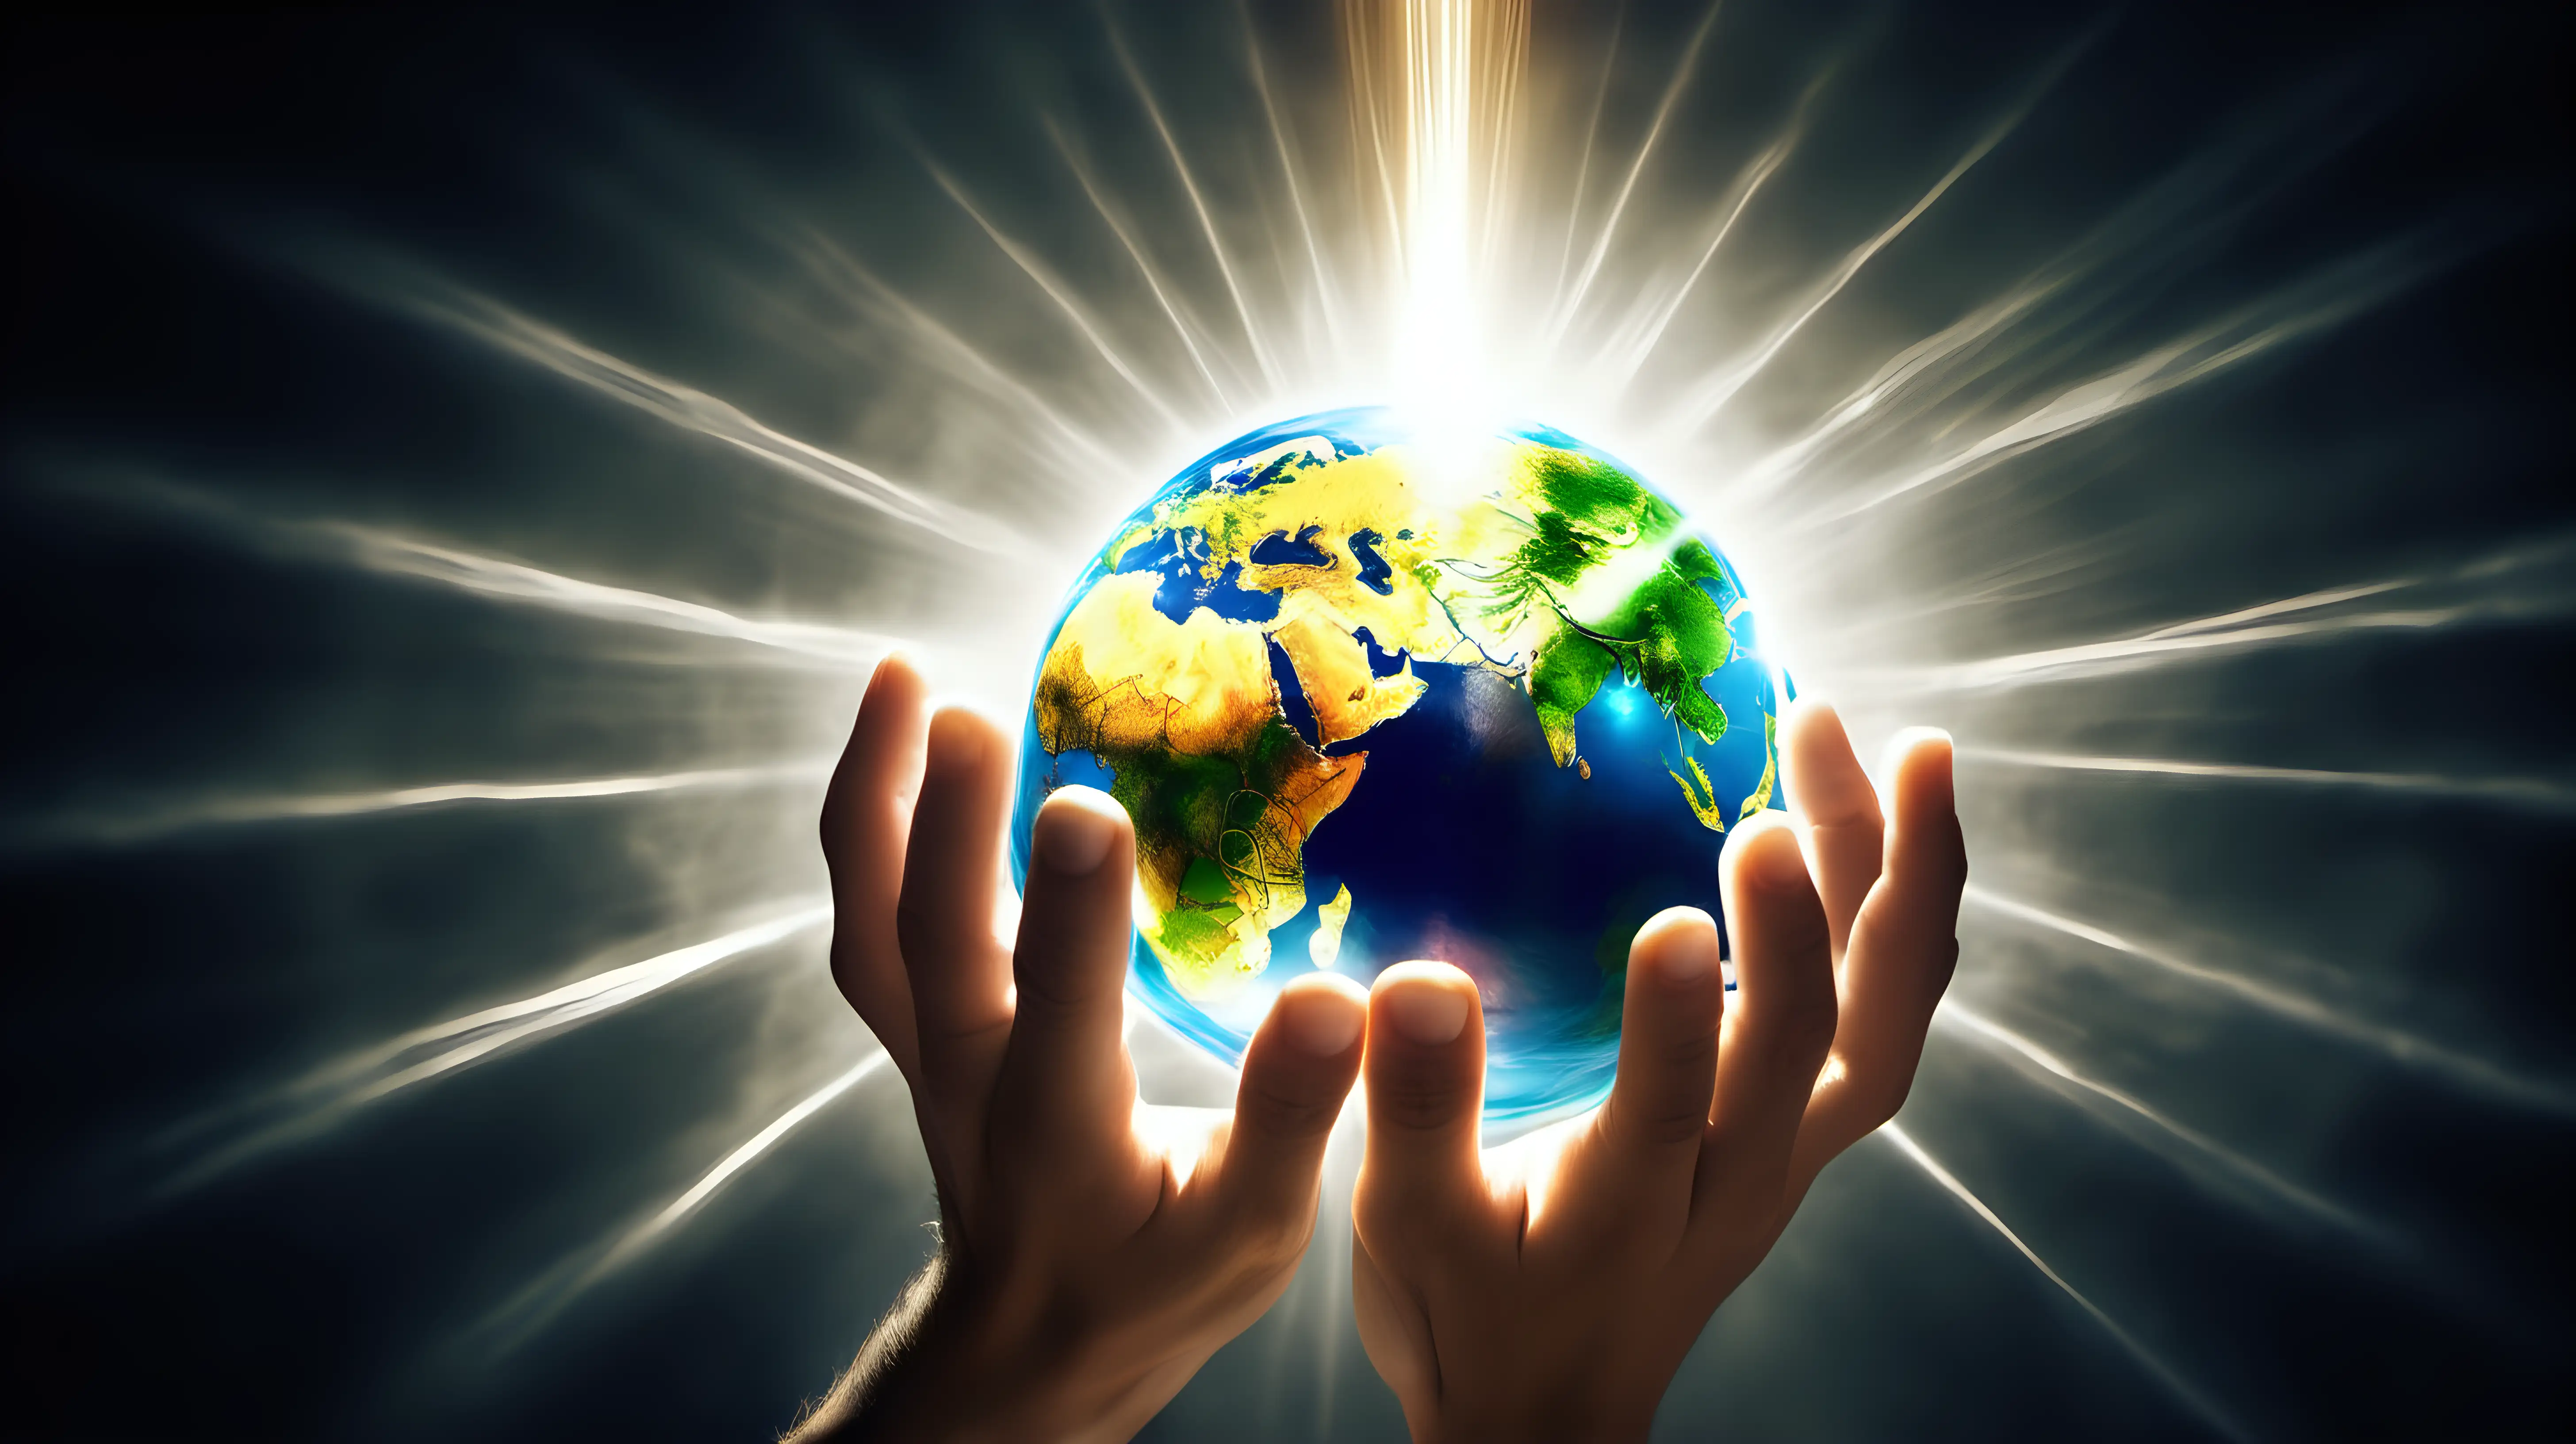 Global Impact Hands Releasing World Sphere with Beams of Light